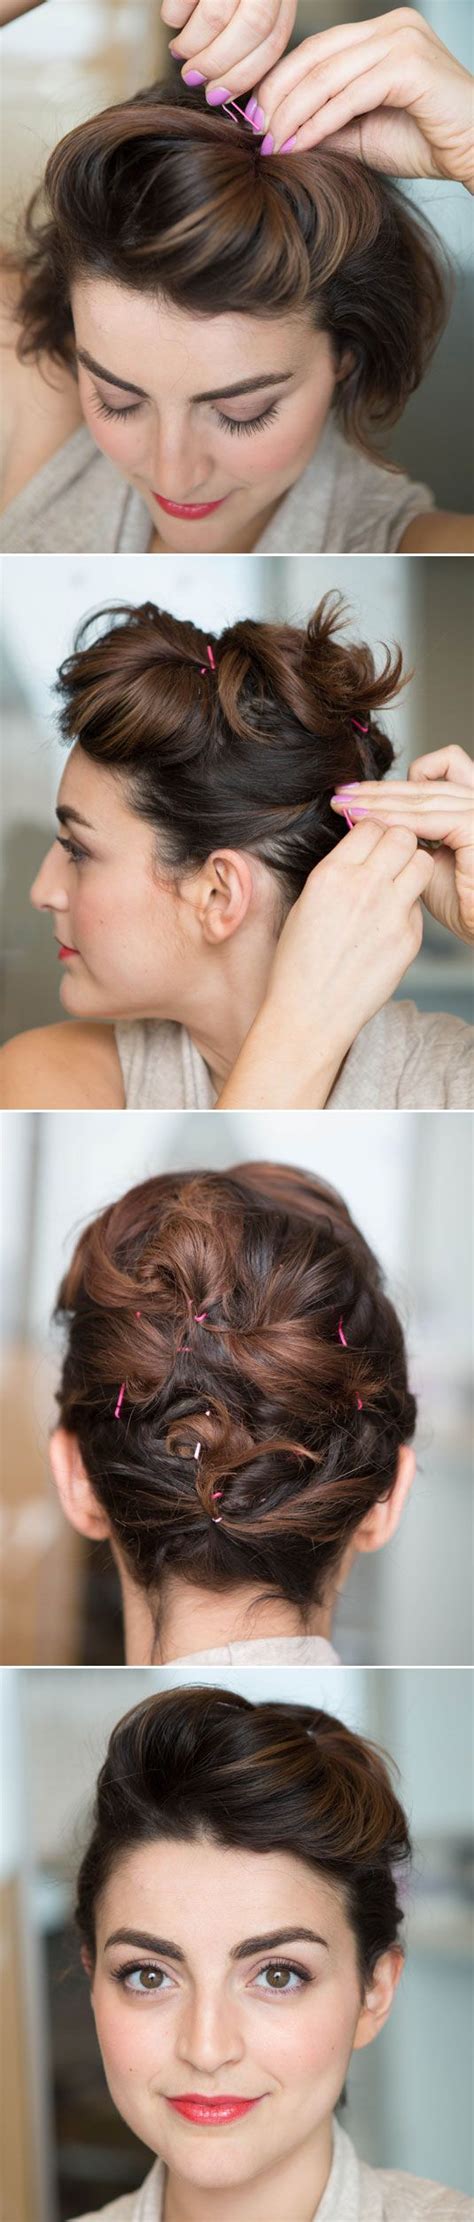 Twist some hair into a crown around your high ponytail for an even lovelier look. 20 Great Updo Styles for Short Hair | Styles Weekly